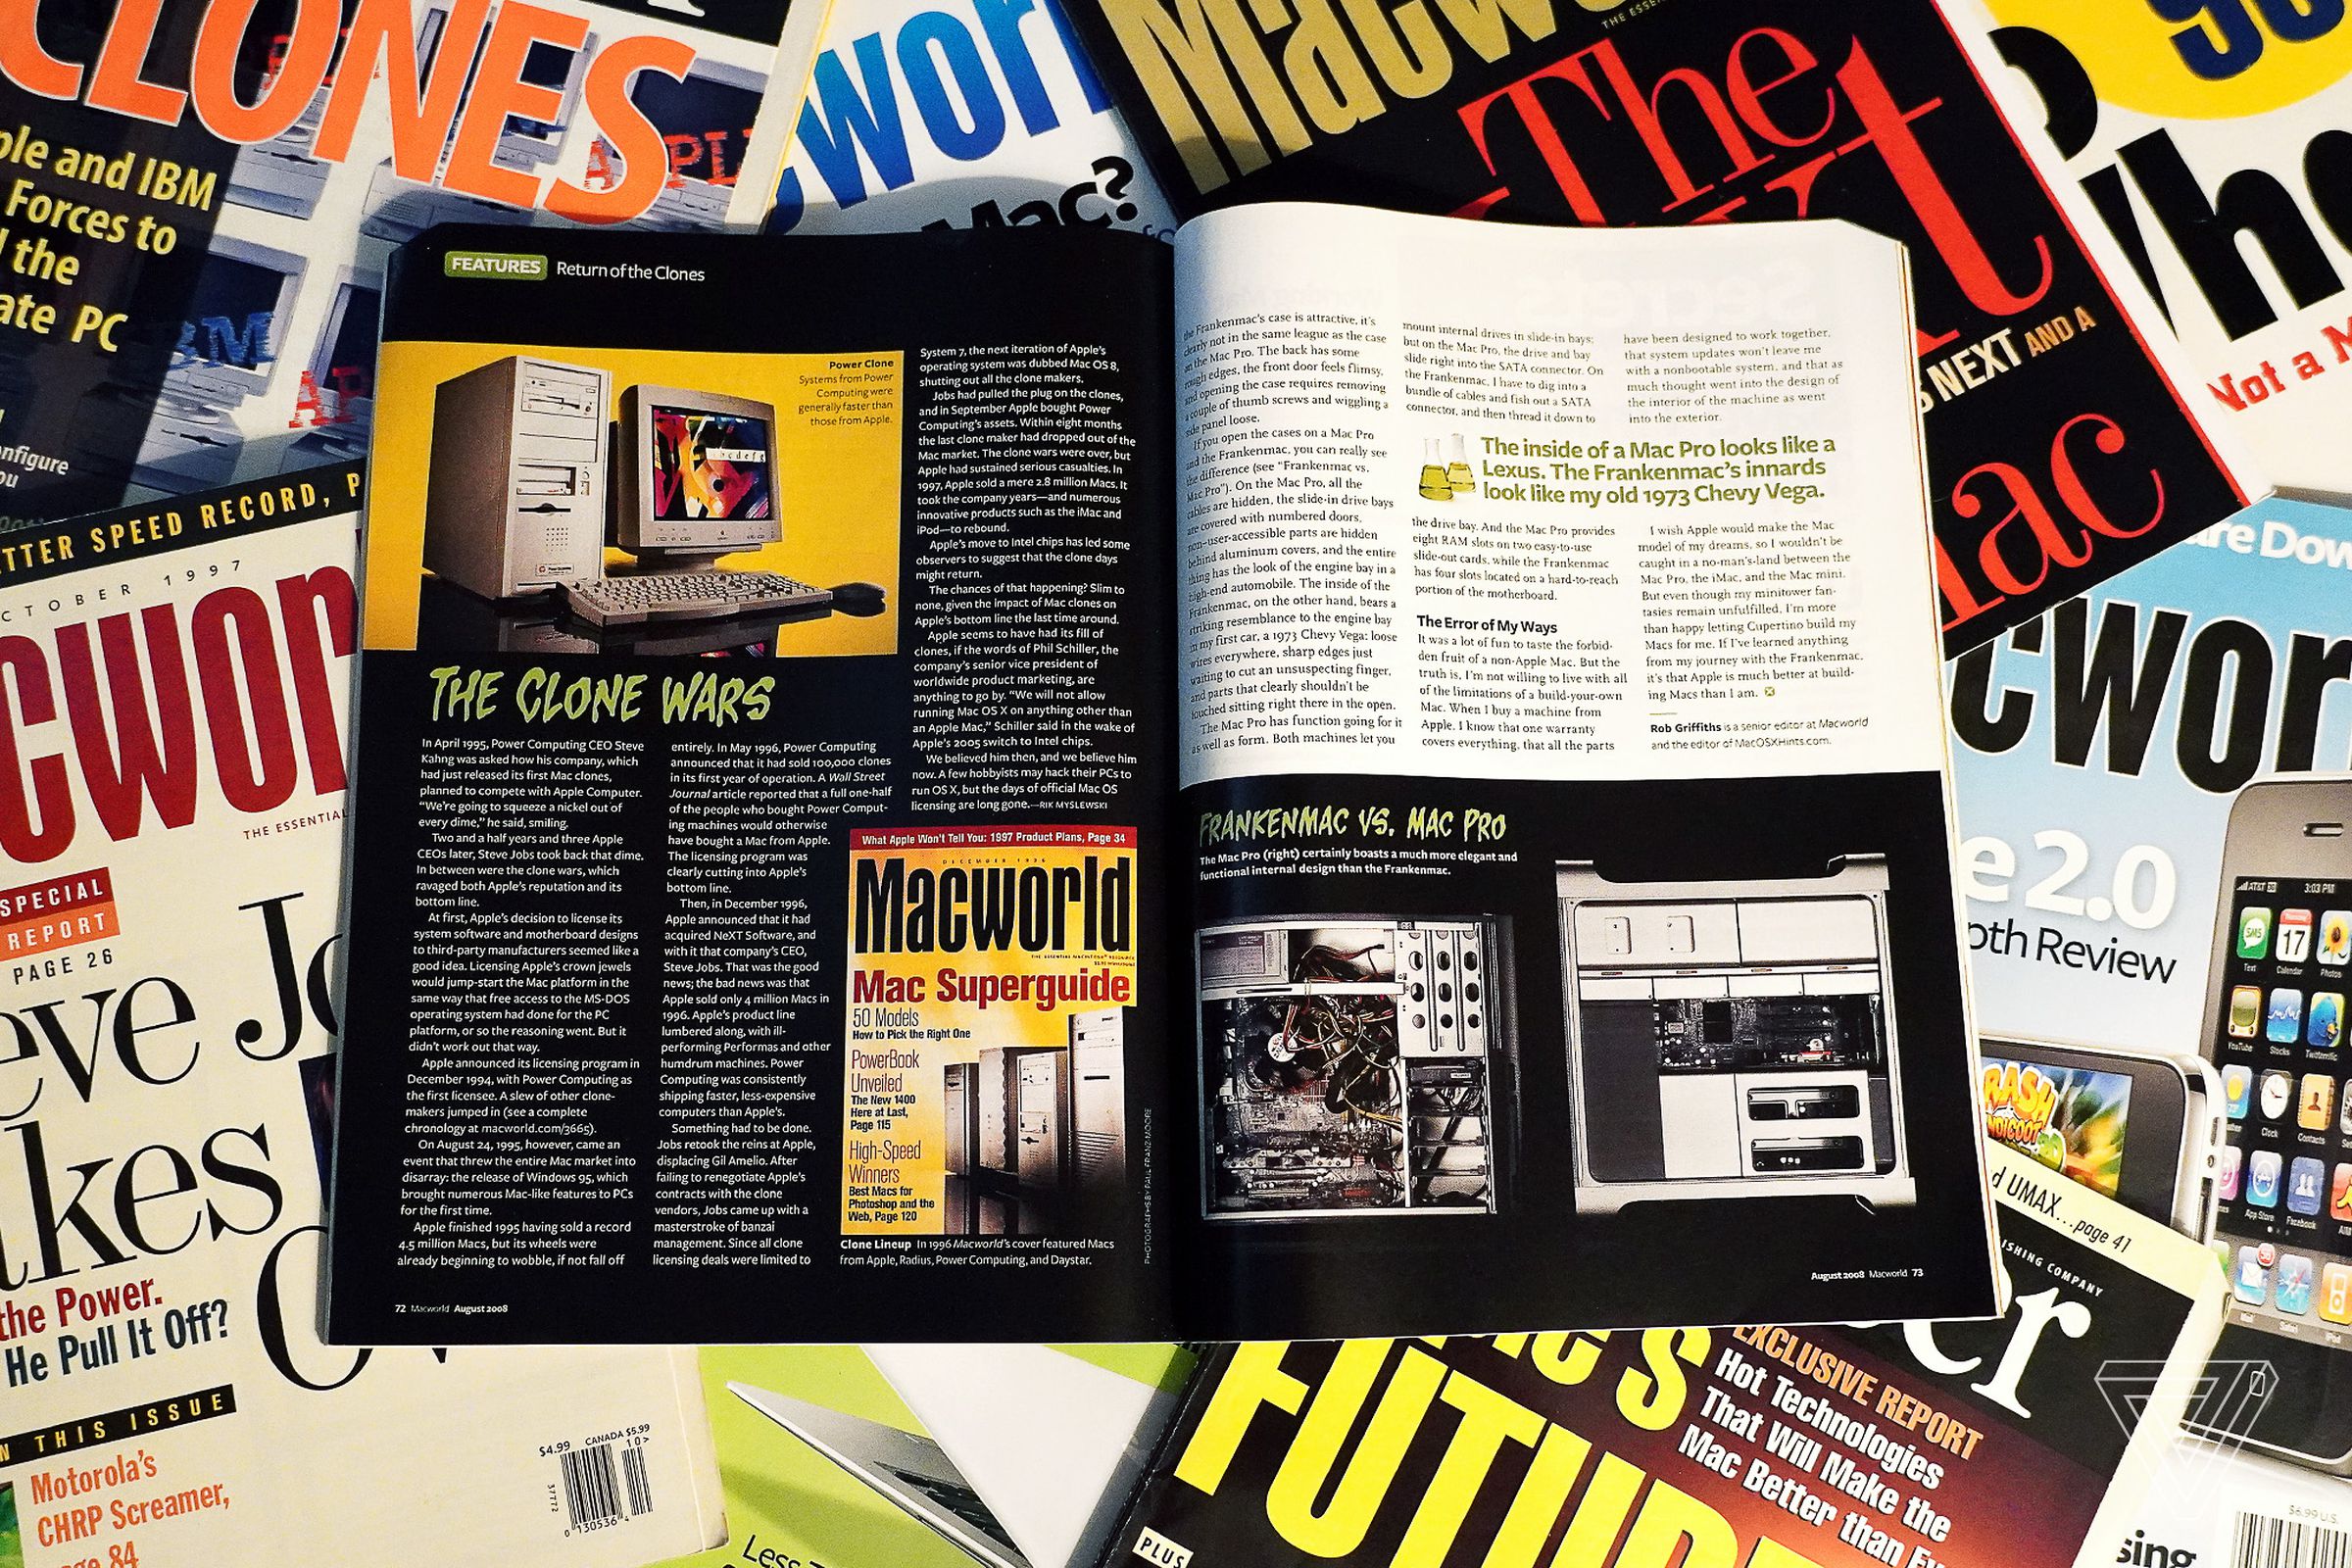 In 2008, Macworld devoted five pages to the kind of midtower Mac that Apple refused to make.